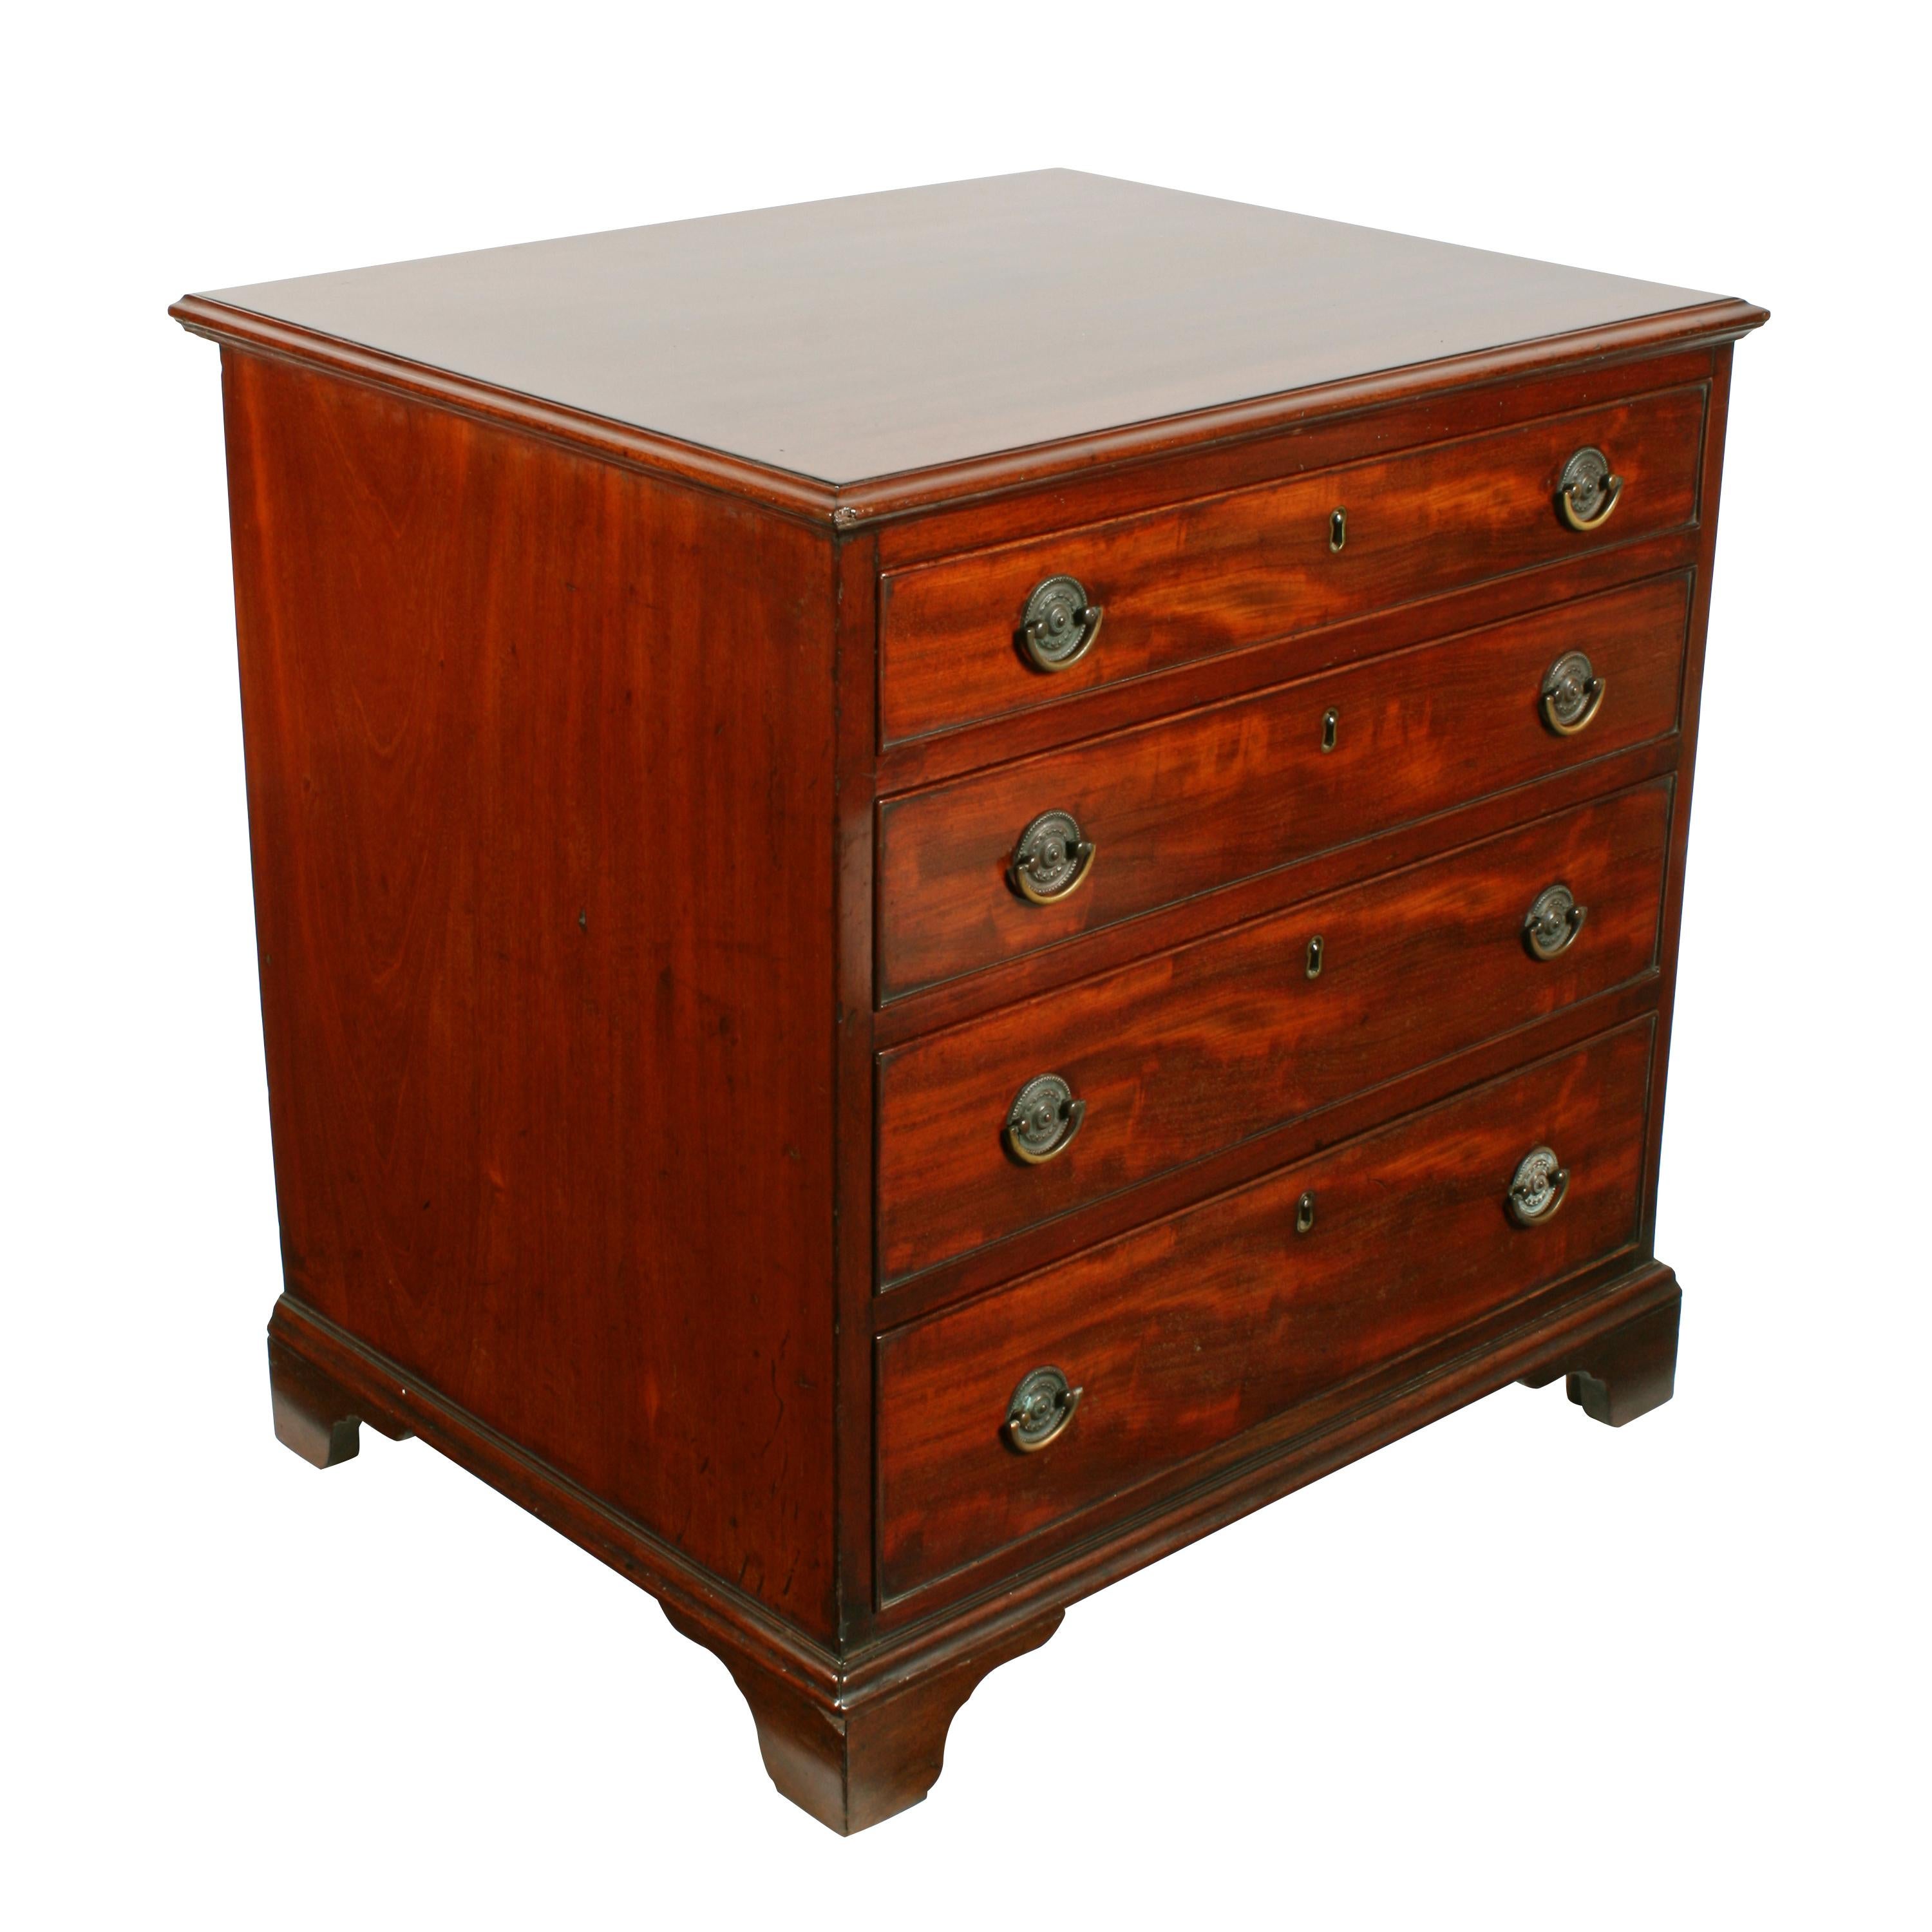 Small Georgian chest of drawers


A small early 19th century Georgian mahogany chest of drawers.

The chest is made from very good quality mahogany that has four mahogany lined graduated drawers with gilt brass locks and original round plate